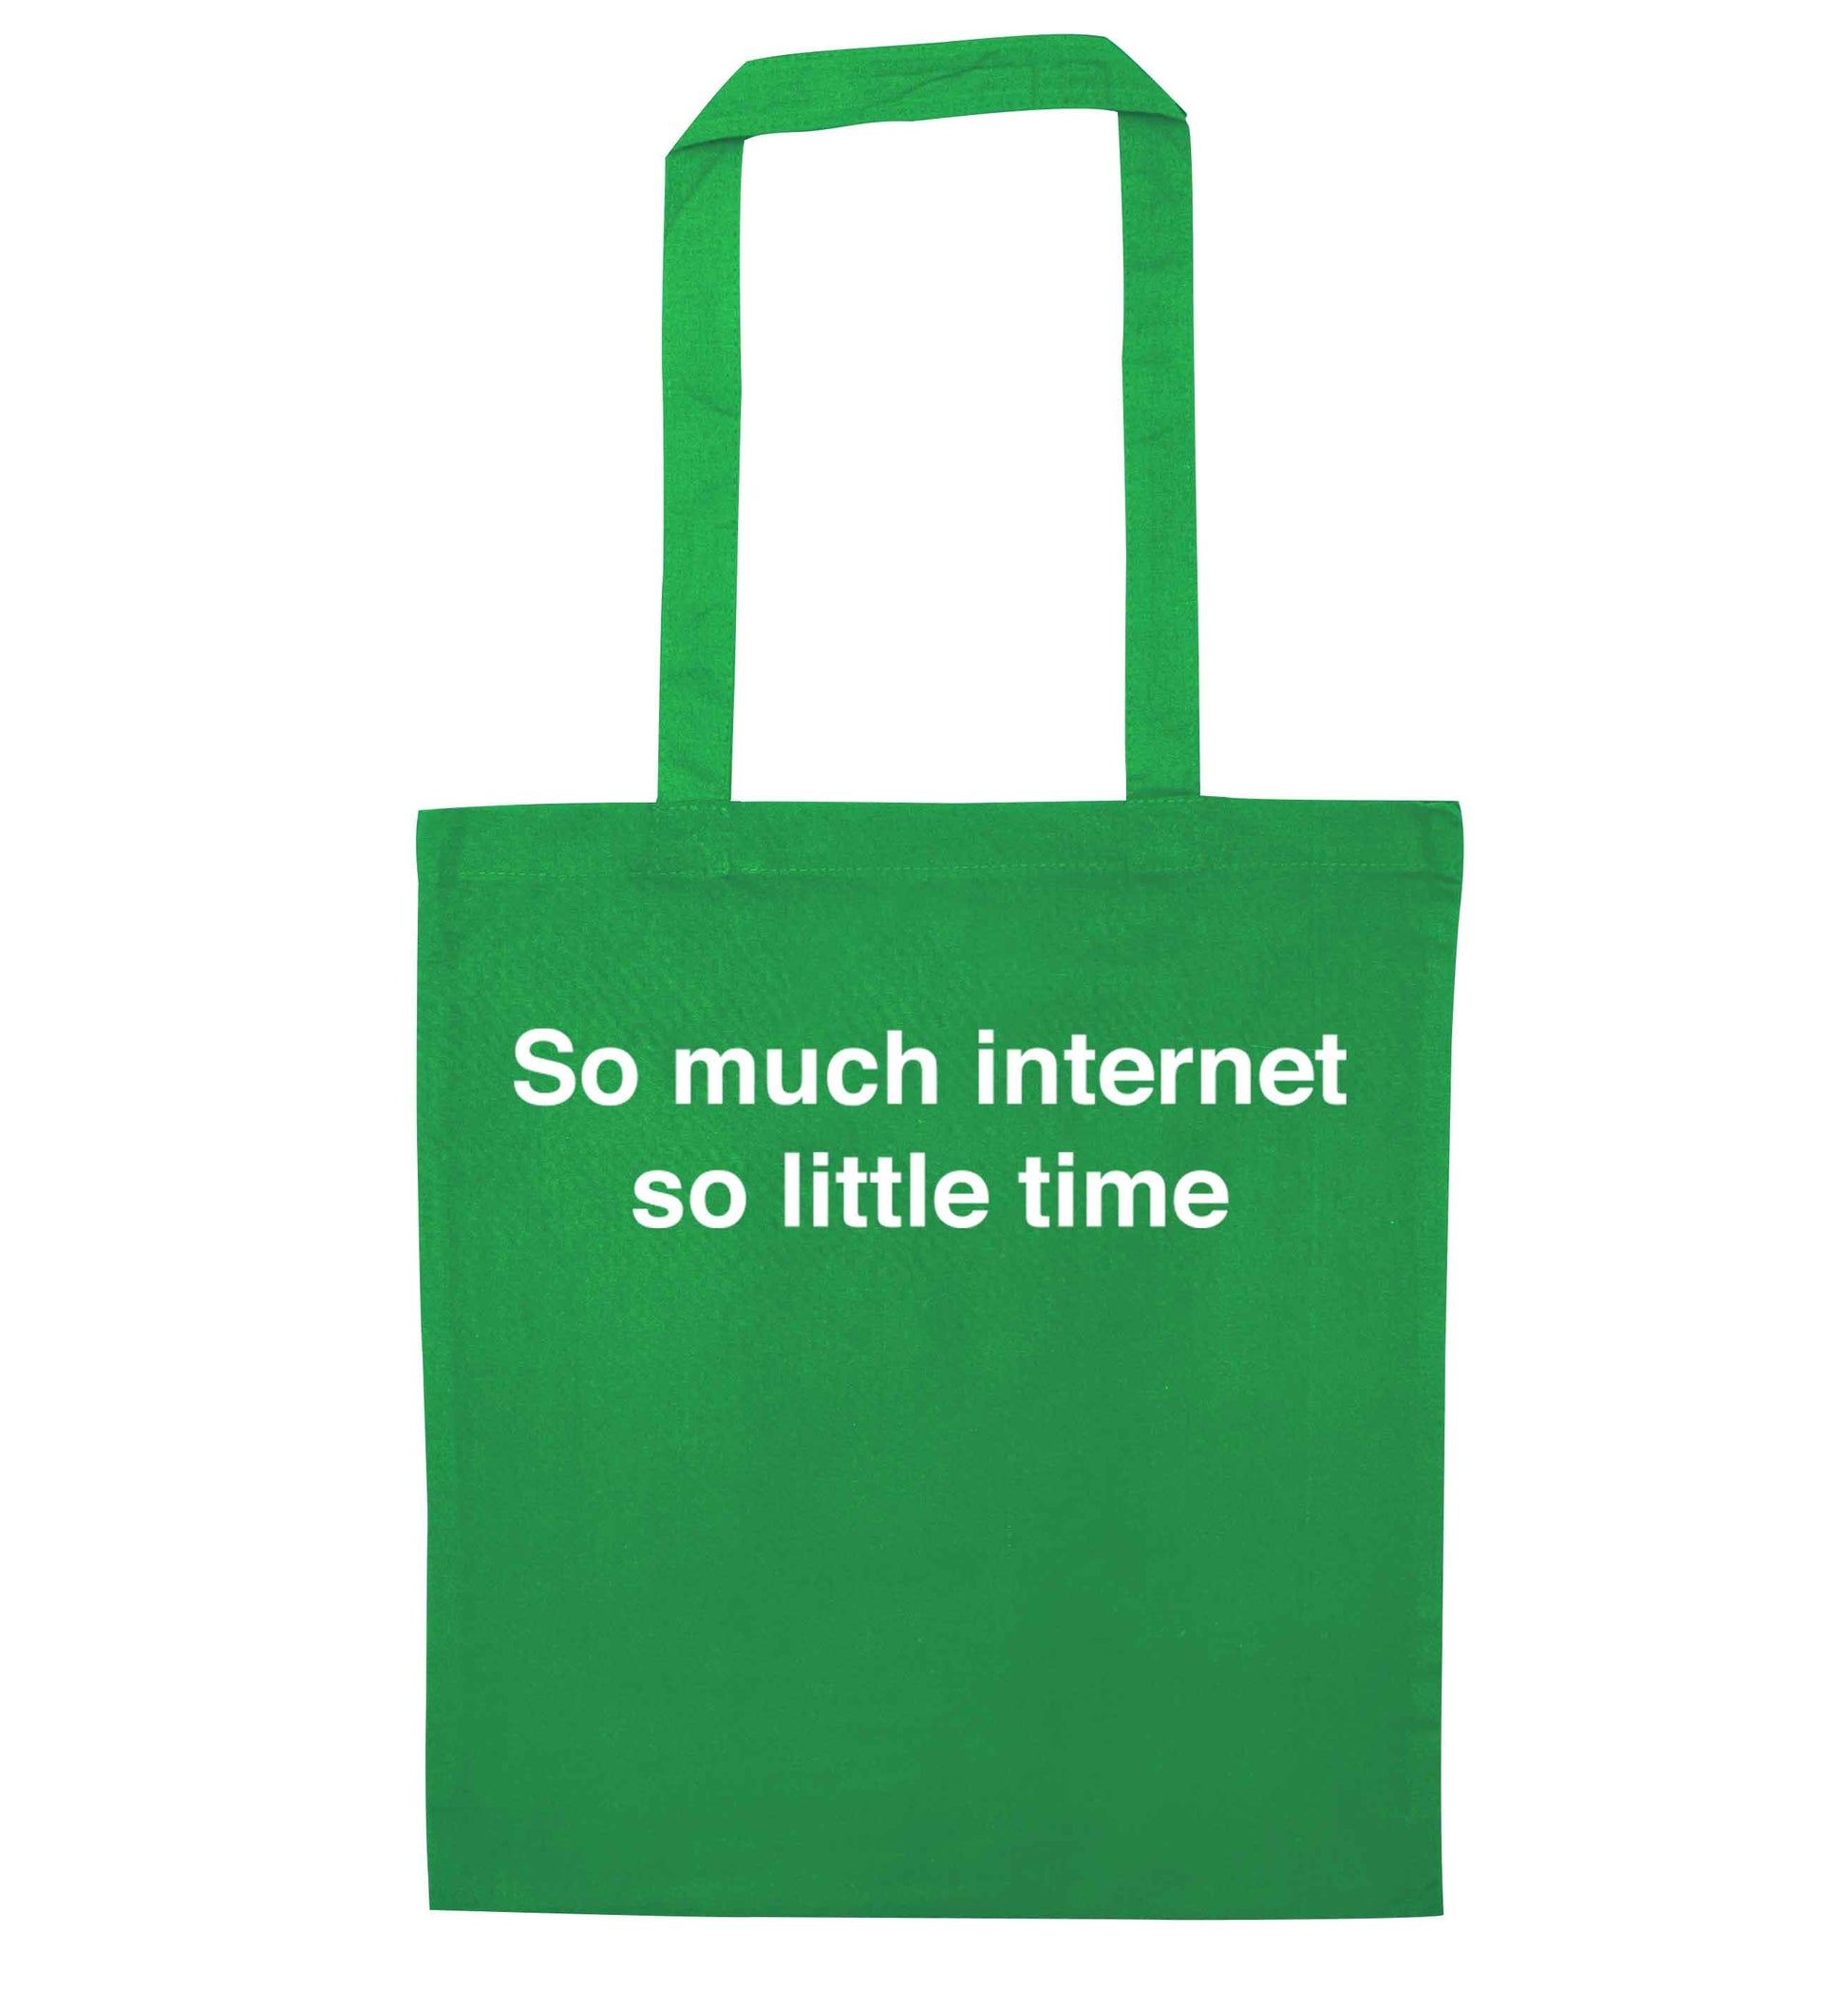 So much internet so little time green tote bag